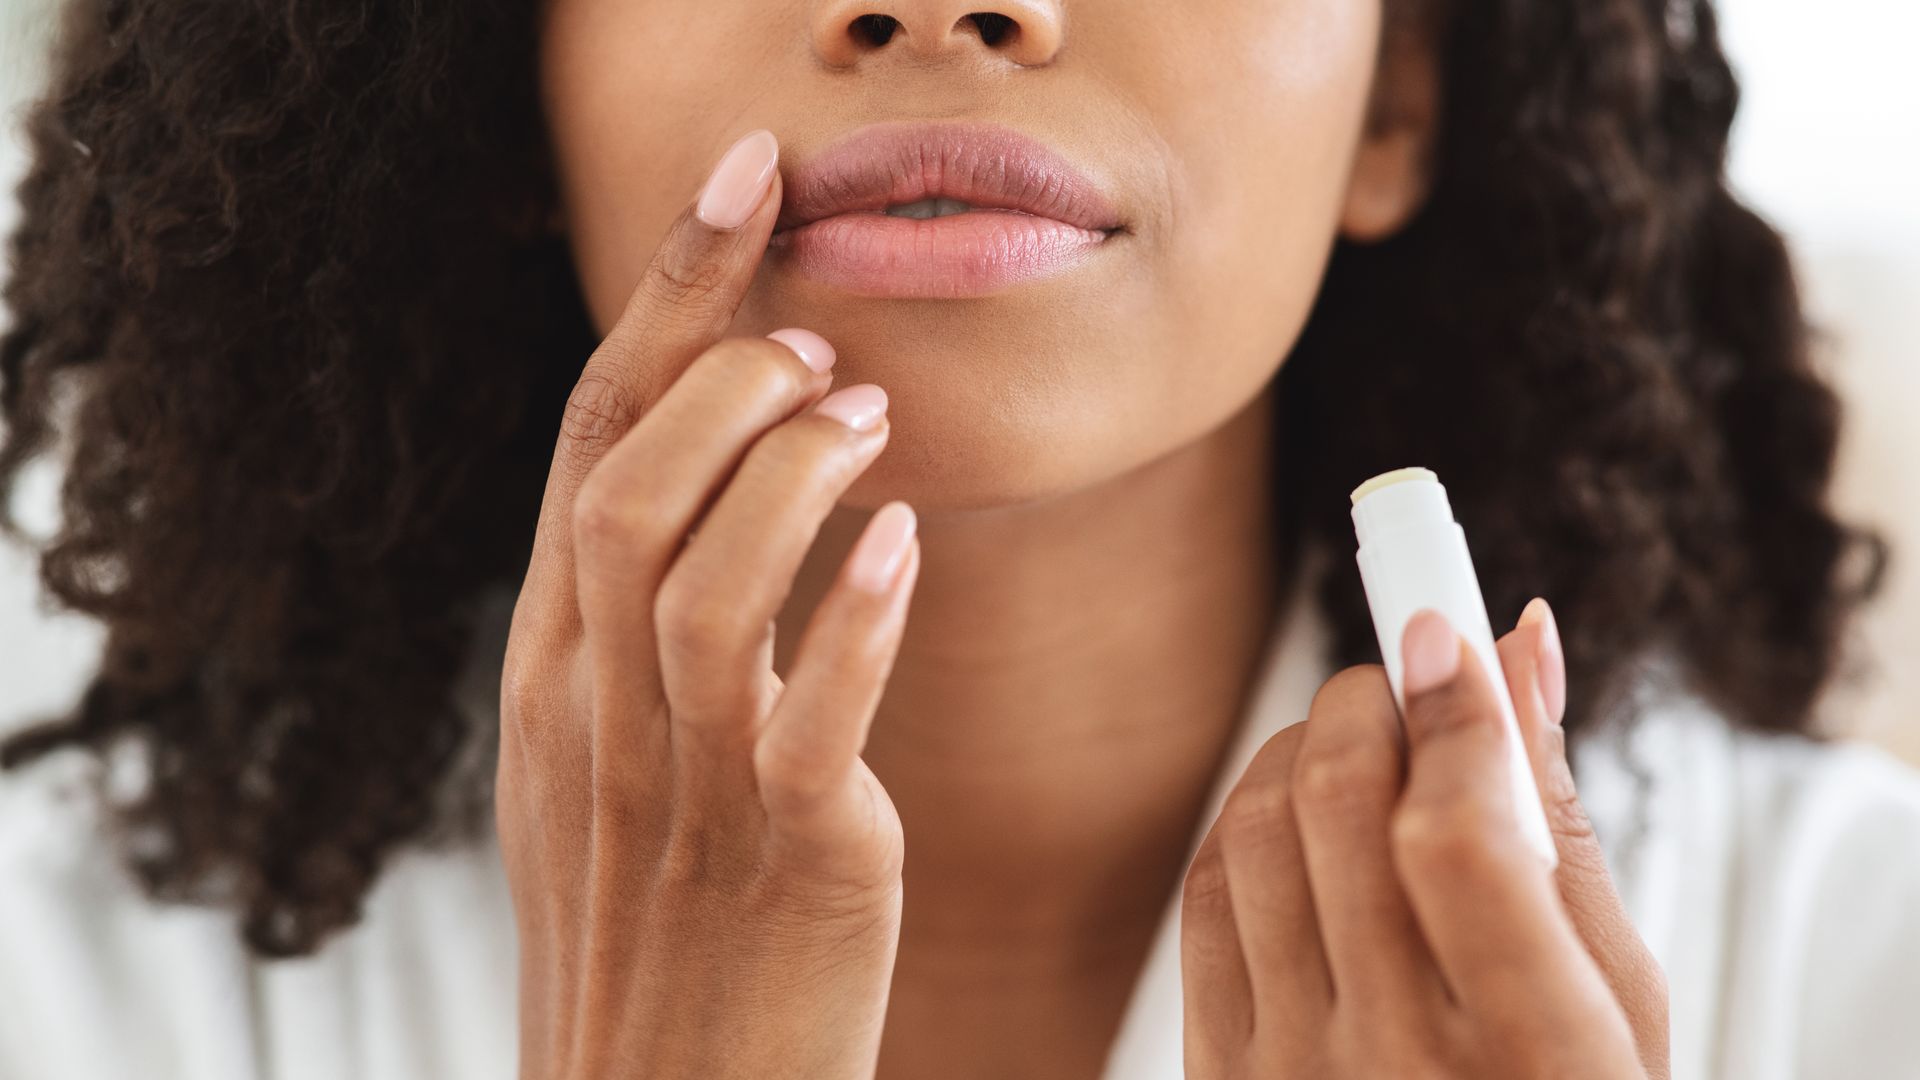 Are my chapped lips down to menopause? A dermatologist sets me straight